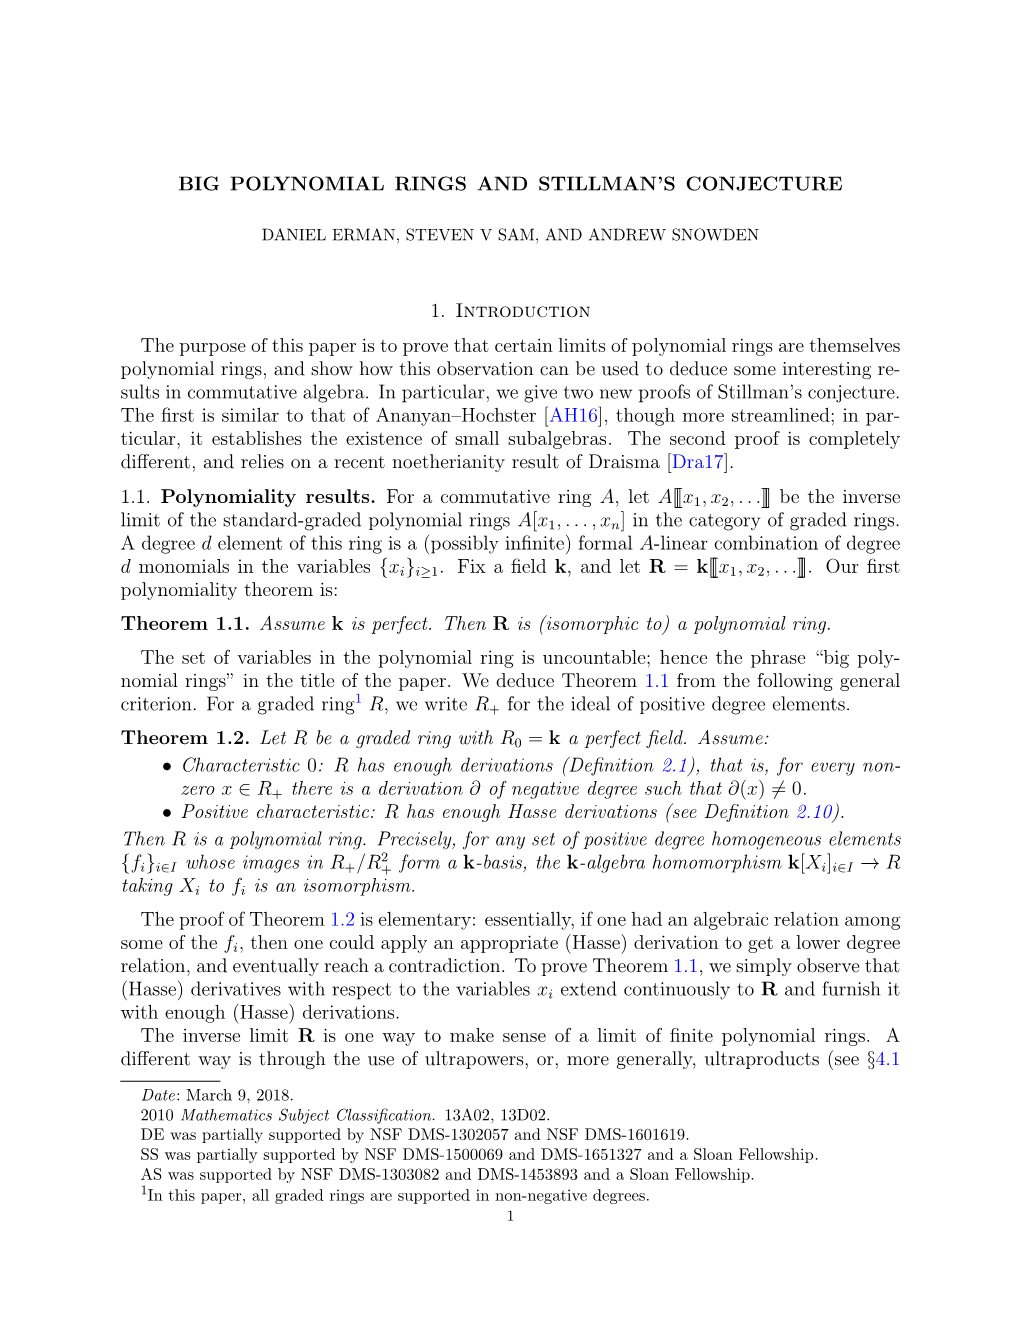 BIG POLYNOMIAL RINGS and STILLMAN's CONJECTURE 1. Introduction the Purpose of This Paper Is to Prove That Certain Limits of Po